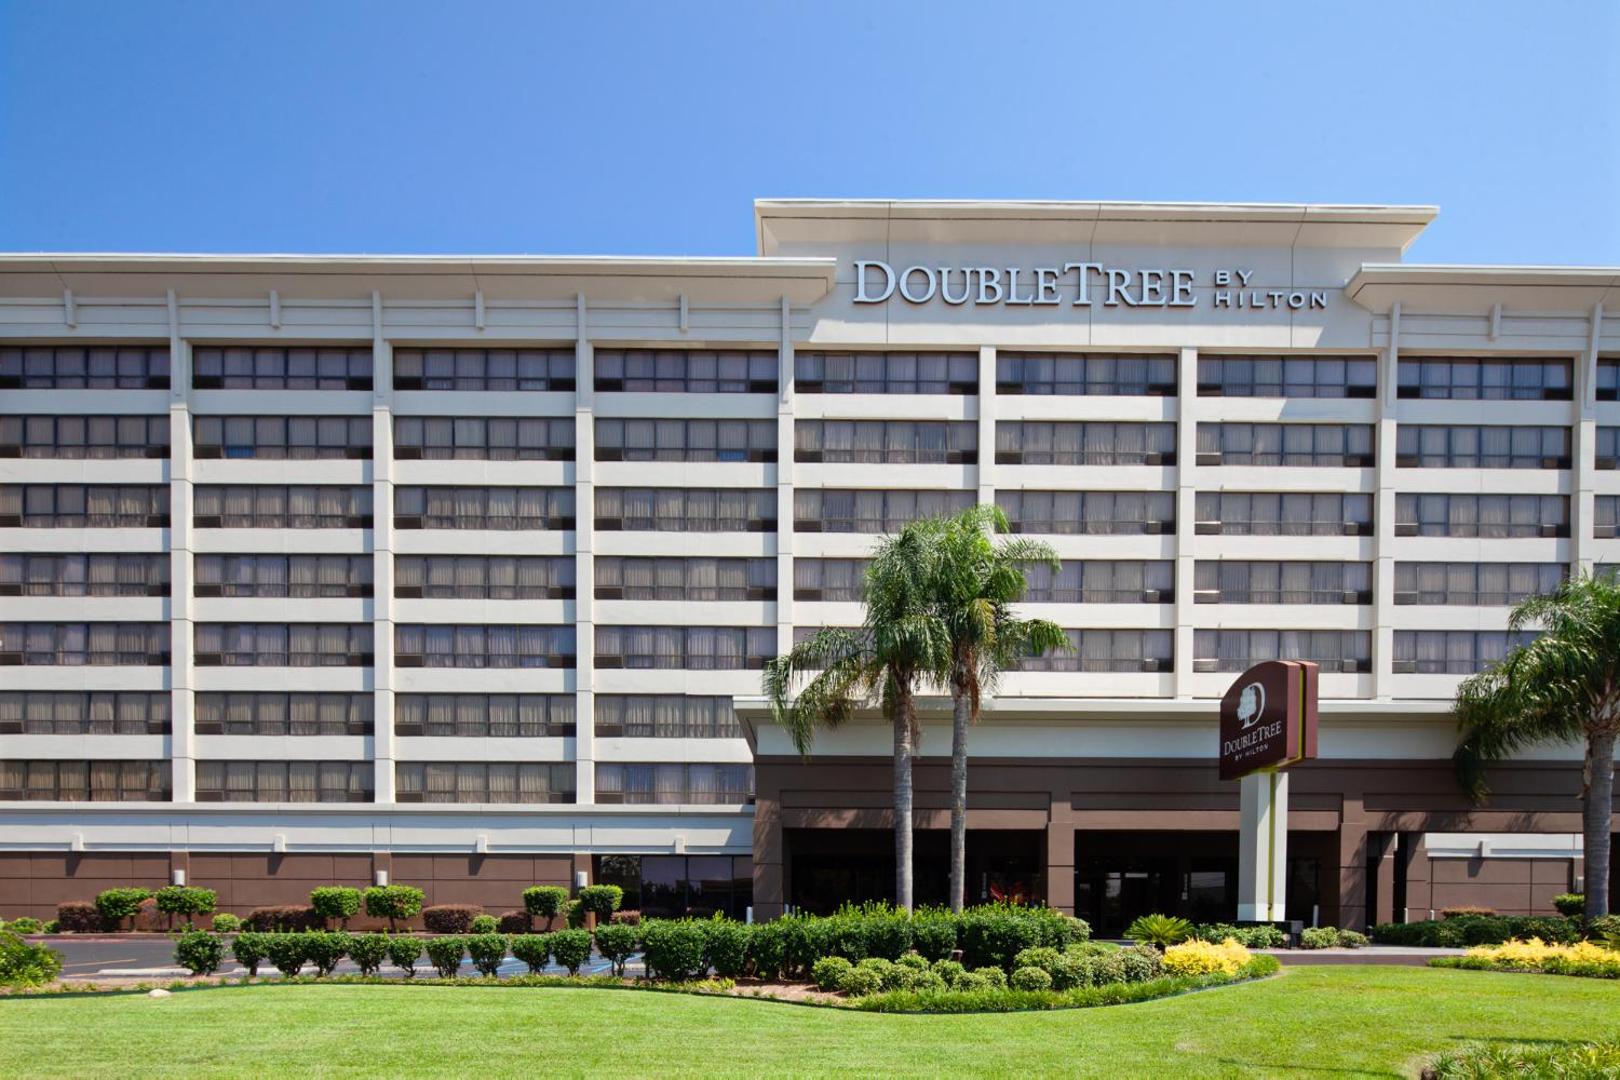 DoubleTree New Orleans Airport